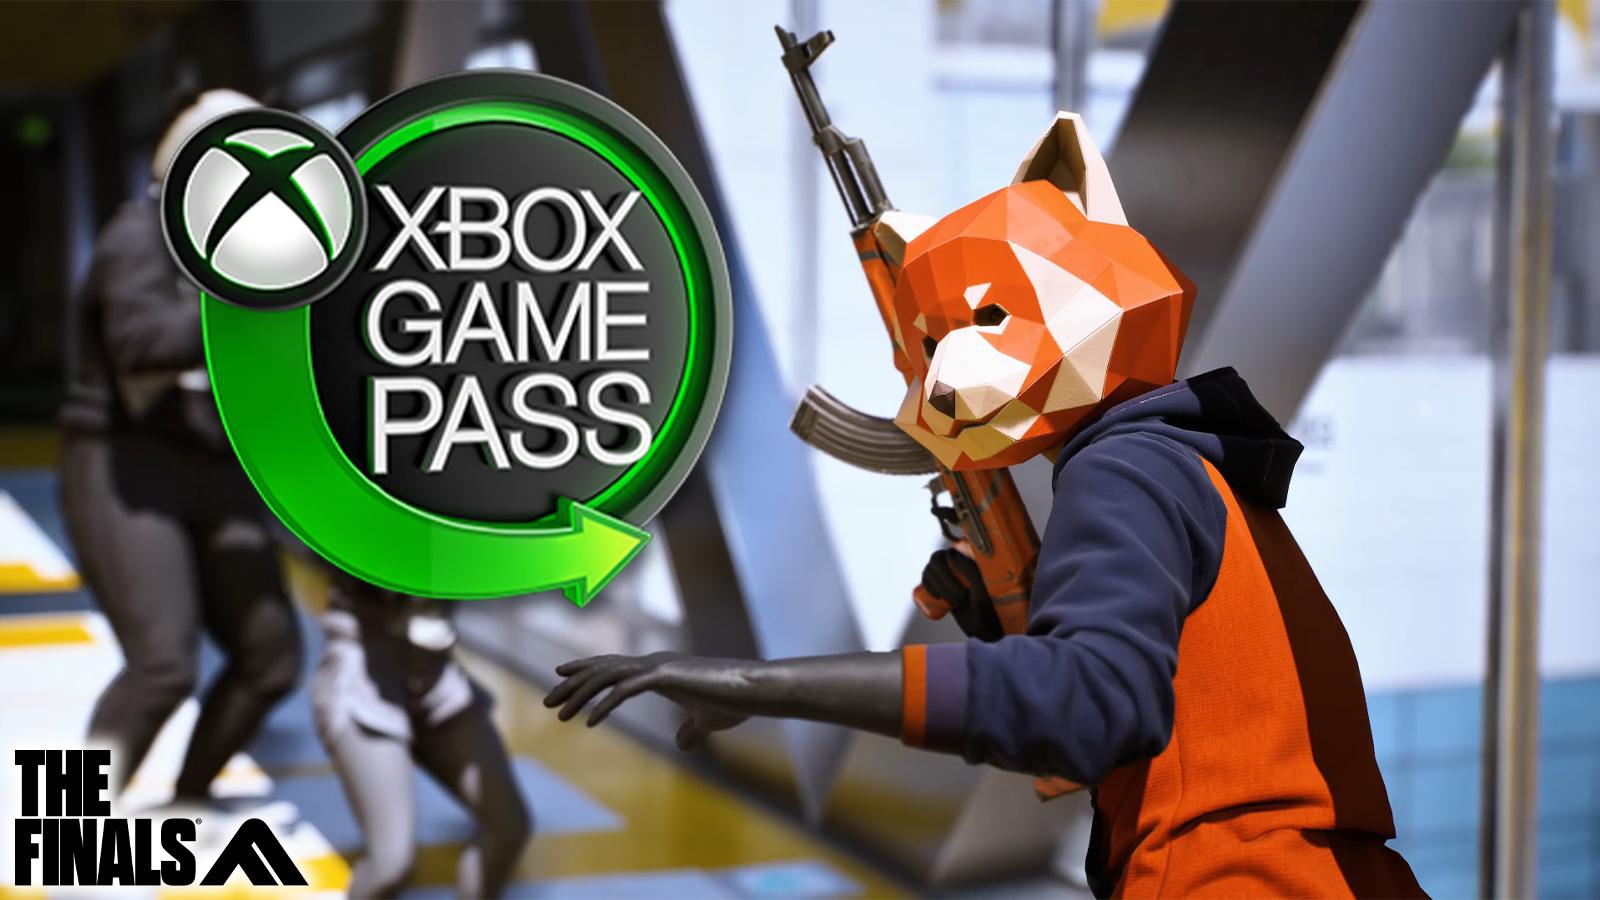 an image of a fox mask from The Finals and Xbox Game Pass logo